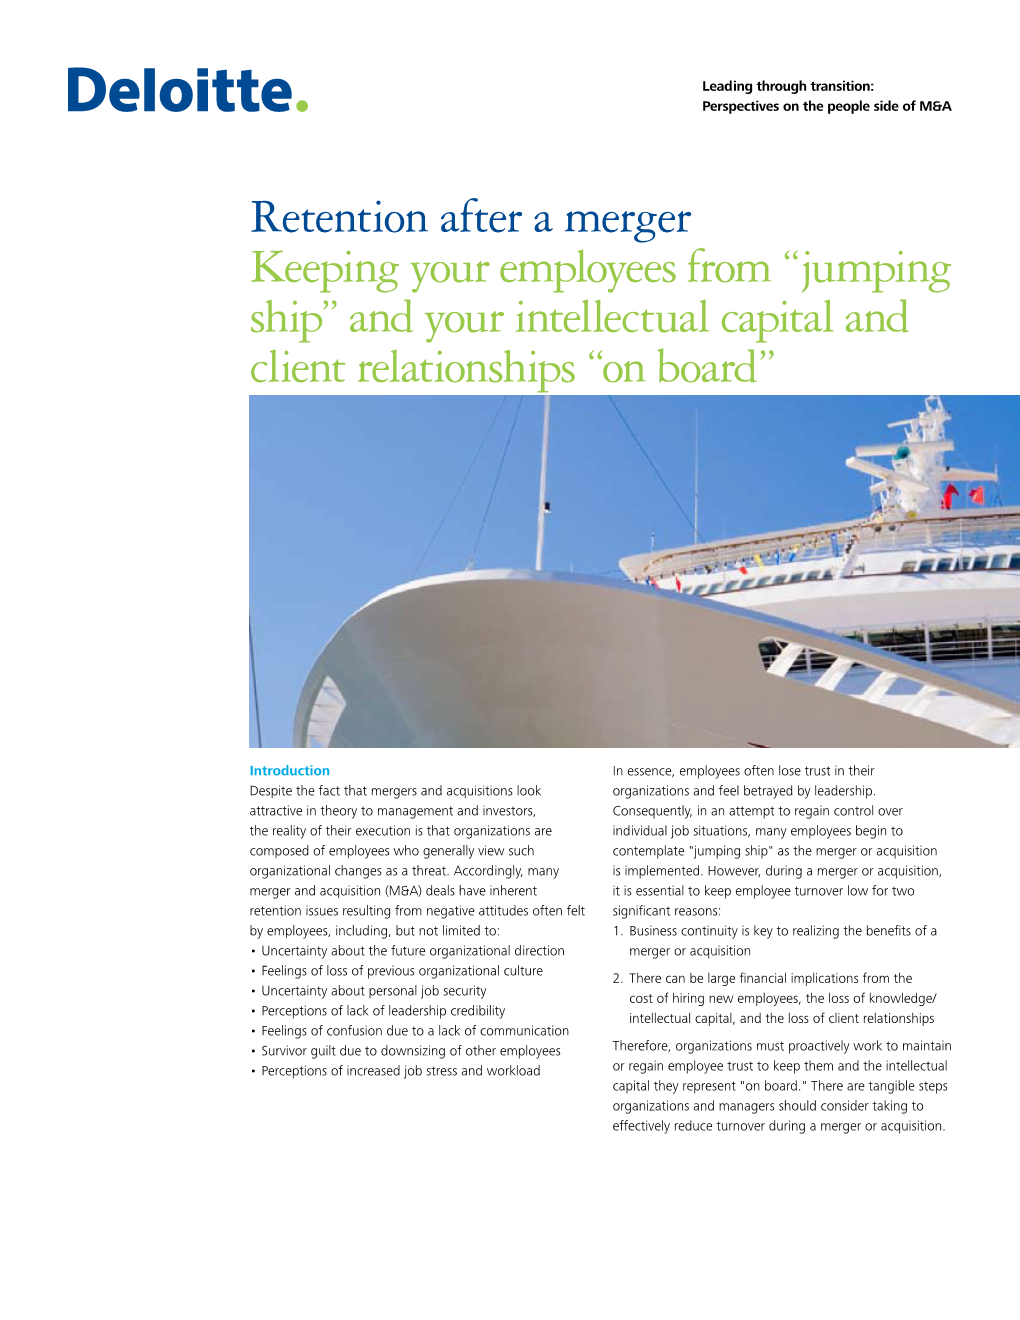 Retention After a Merger Keeping Your Employees from “Jumping Ship” and Your Intellectual Capital and Client Relationships “On Board”